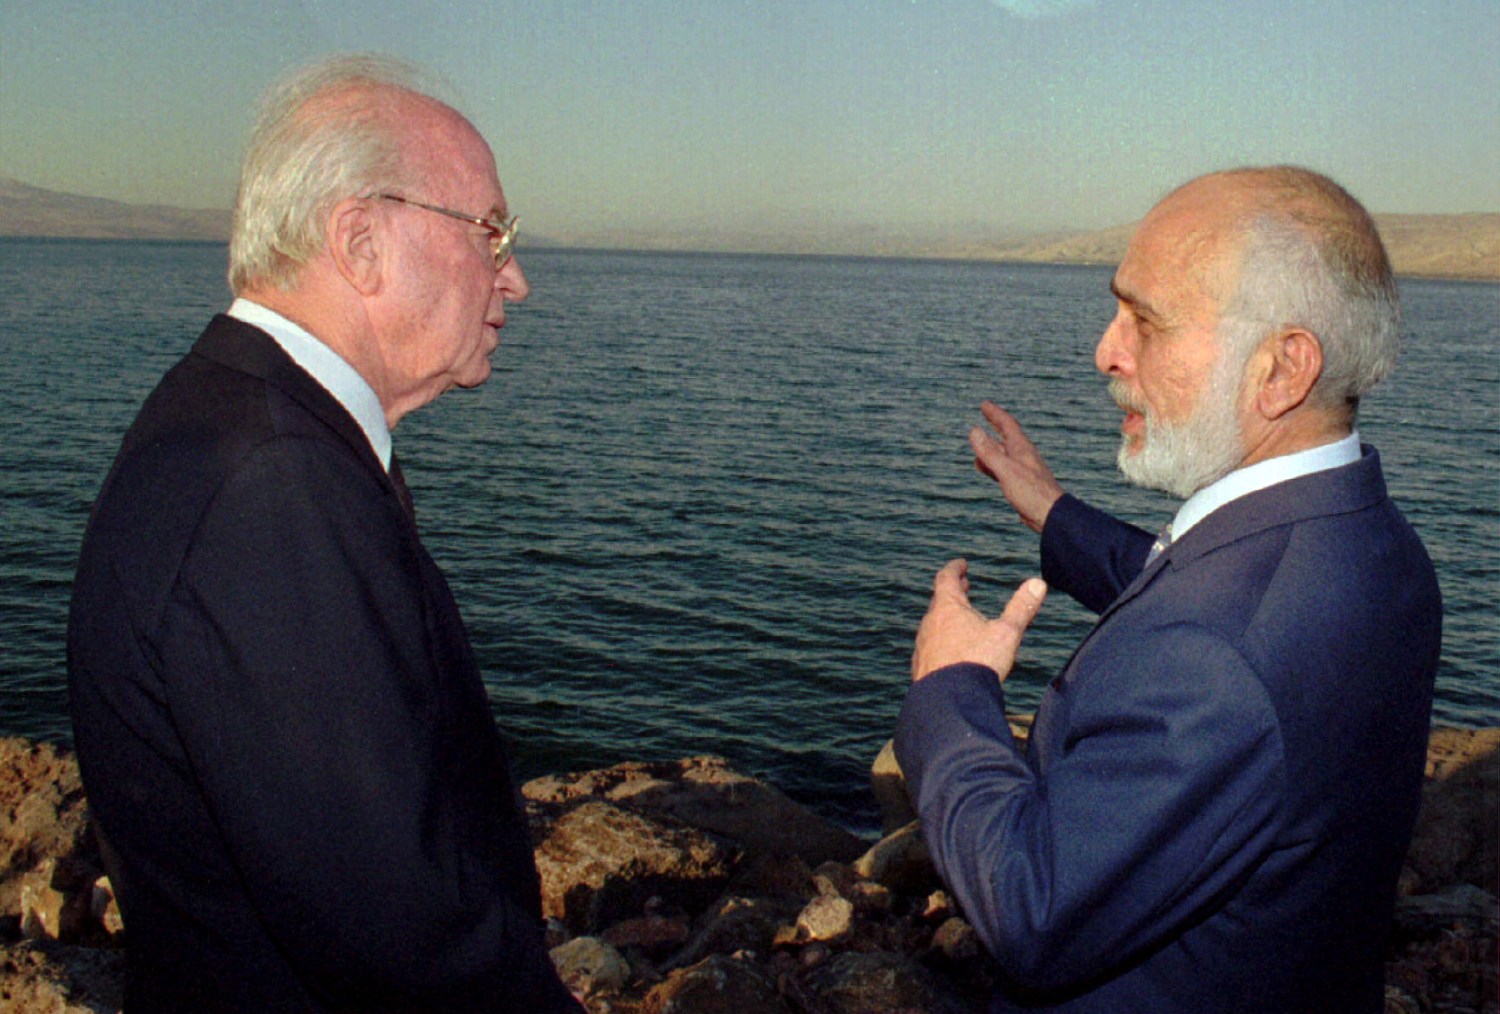 Jordan's King Hussein (R) and Israeli Prime Minister Yitzhak Rabin talk on the shore of the Sea of Galilee in Tzemach November 10, after exchanging ratified copies of the Israel-Jordan Peace Treaty - PBEAHUNIDCU